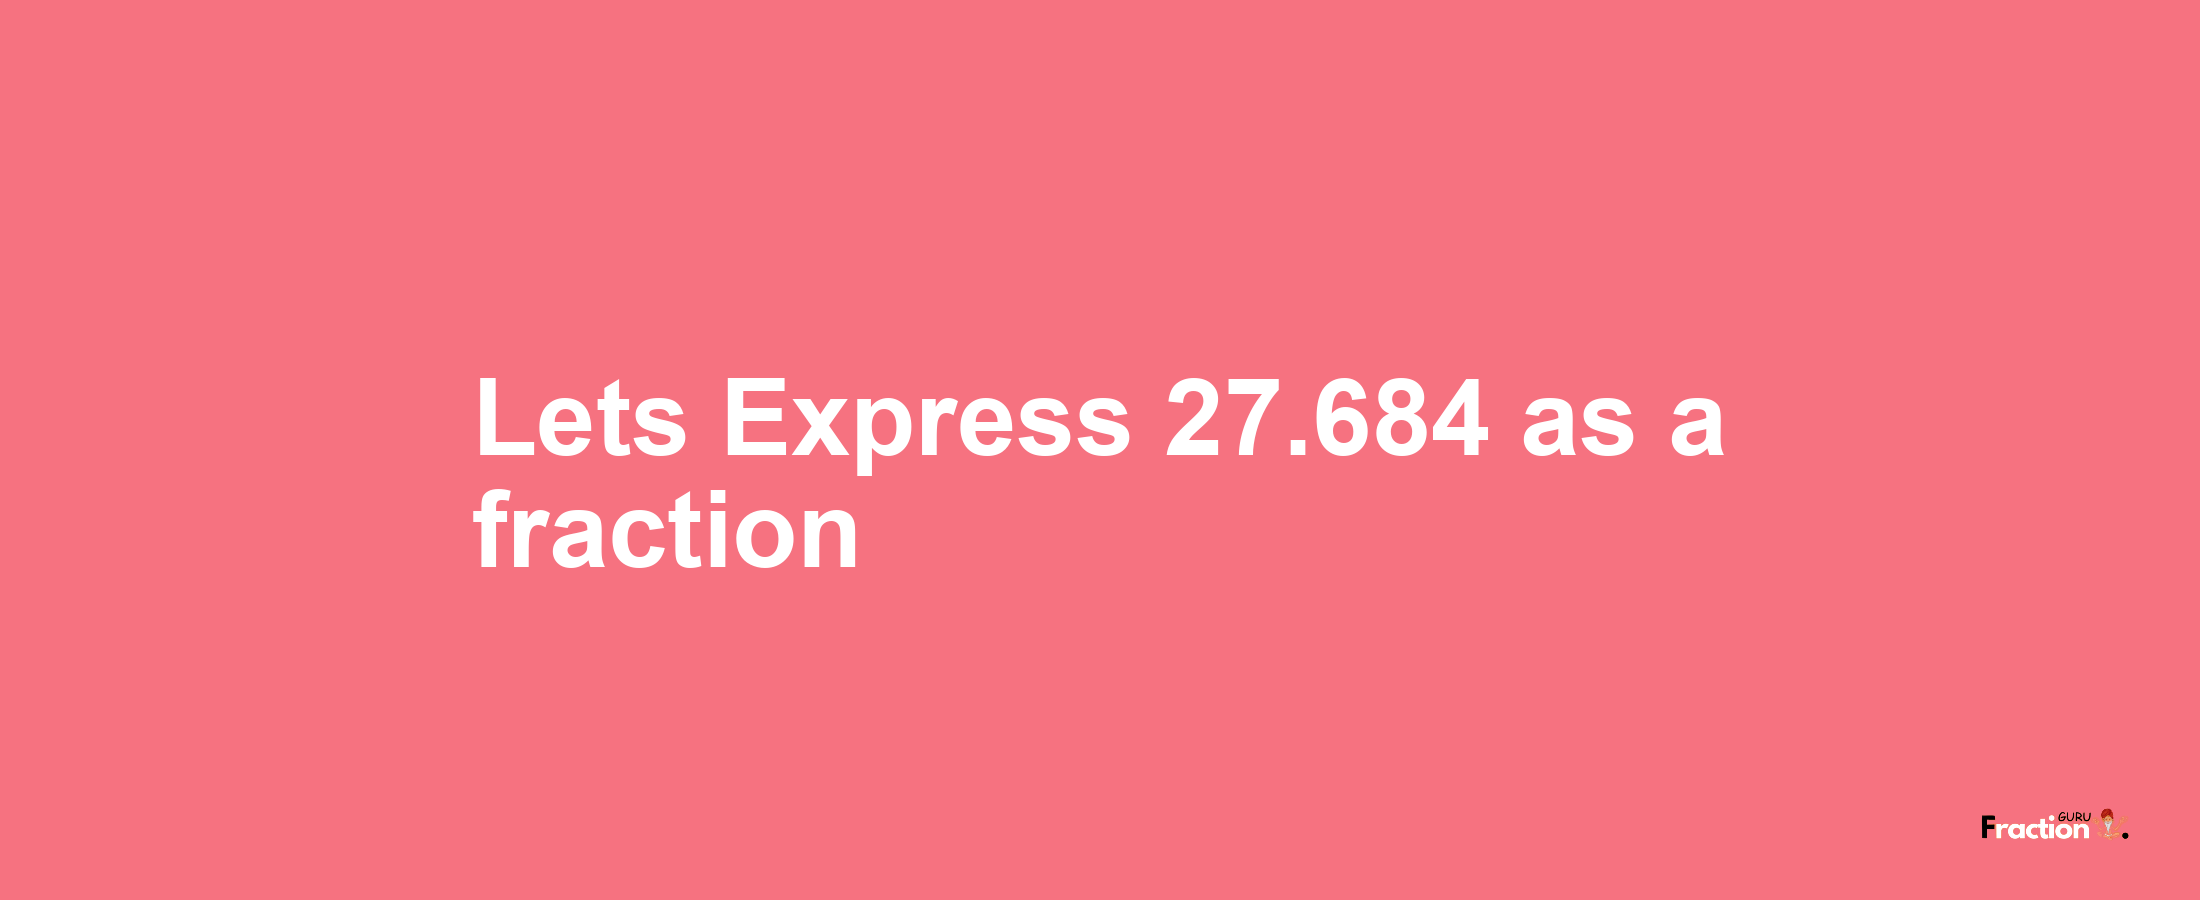 Lets Express 27.684 as afraction